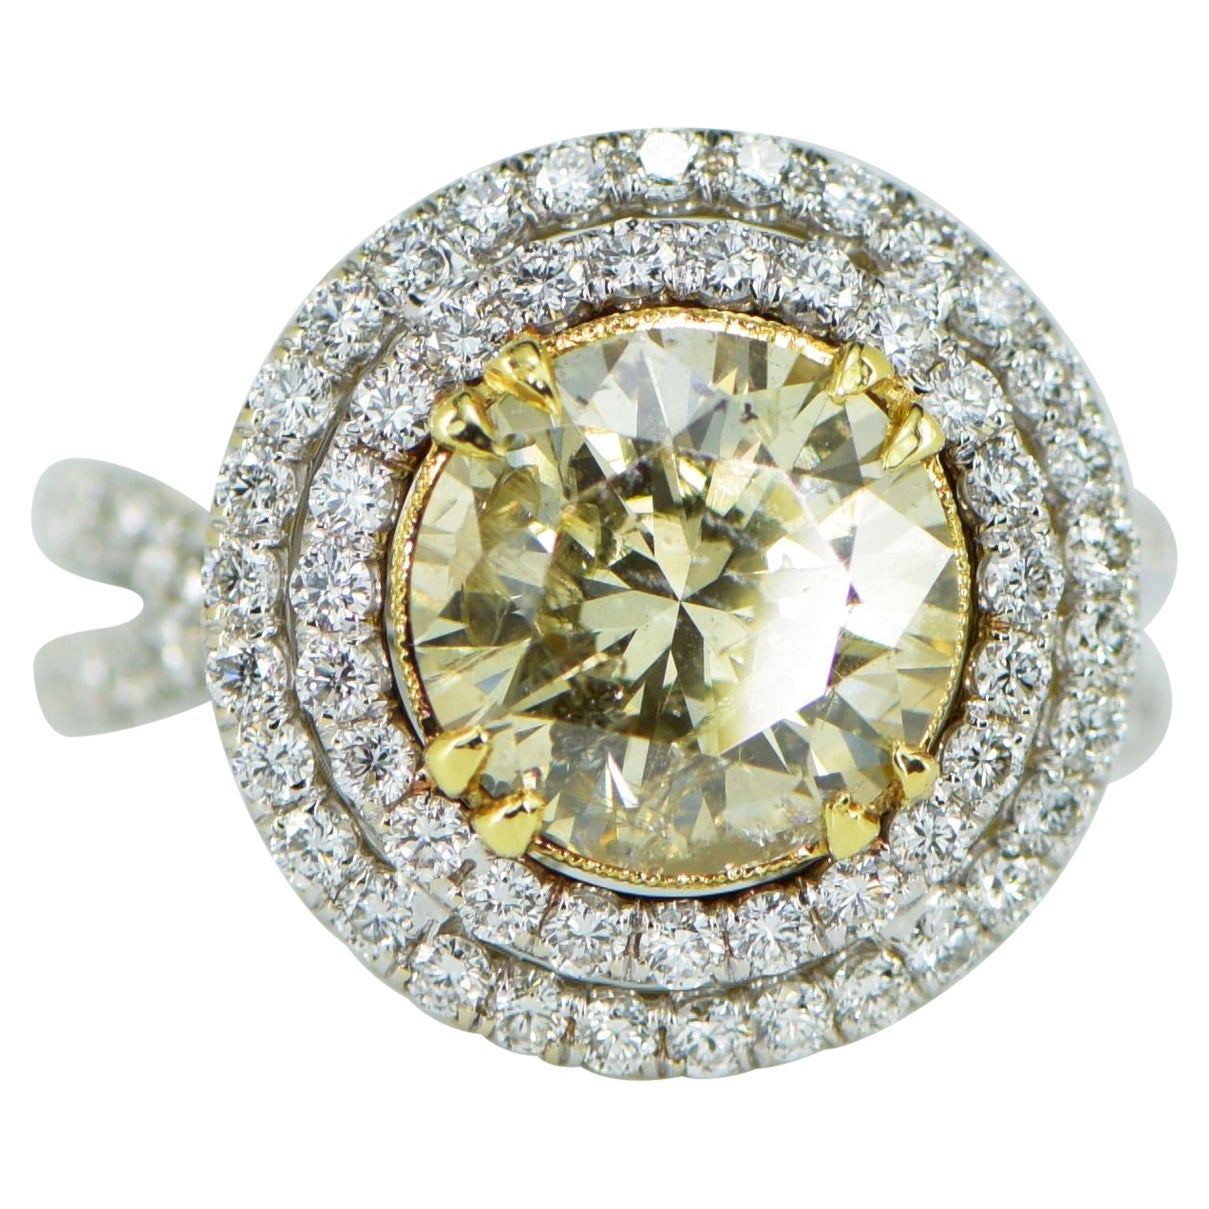 This magnificent yellow diamond ring is a true masterpiece, expertly crafted in 18 karat white gold. The stunning 3.10ct center diamond radiates with a warm and vibrant yellow hue, beautifully complemented by the sparkling 1.27ct of white diamonds.